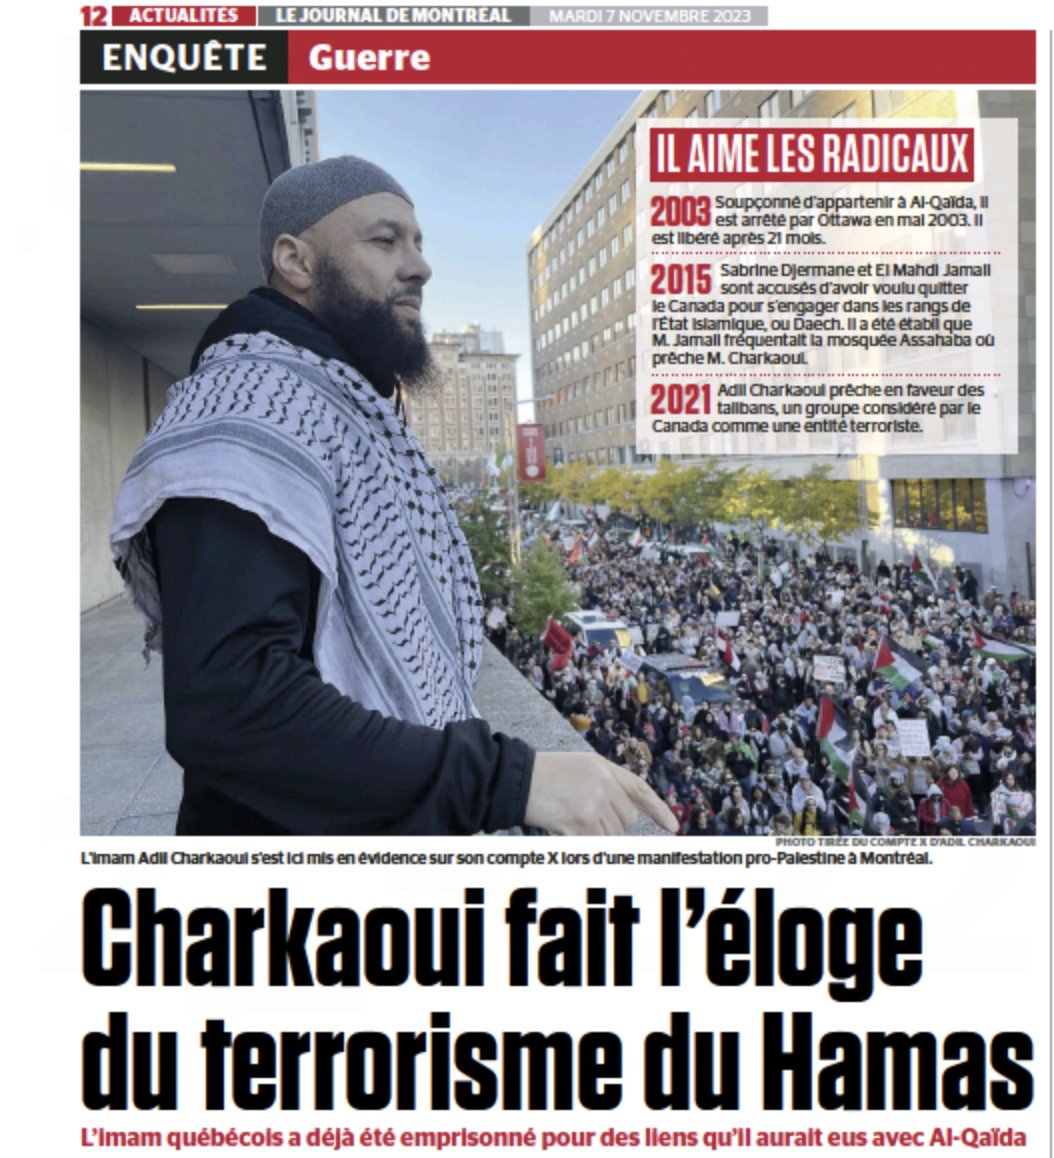 Norman Spector on X: "Charkaoui praises Hamas terrorism The Quebec imam was  already imprisoned once for links he allegedly had with Al-Qaeda  Controversial Imam Adil Charkaoui has made public calls for violence